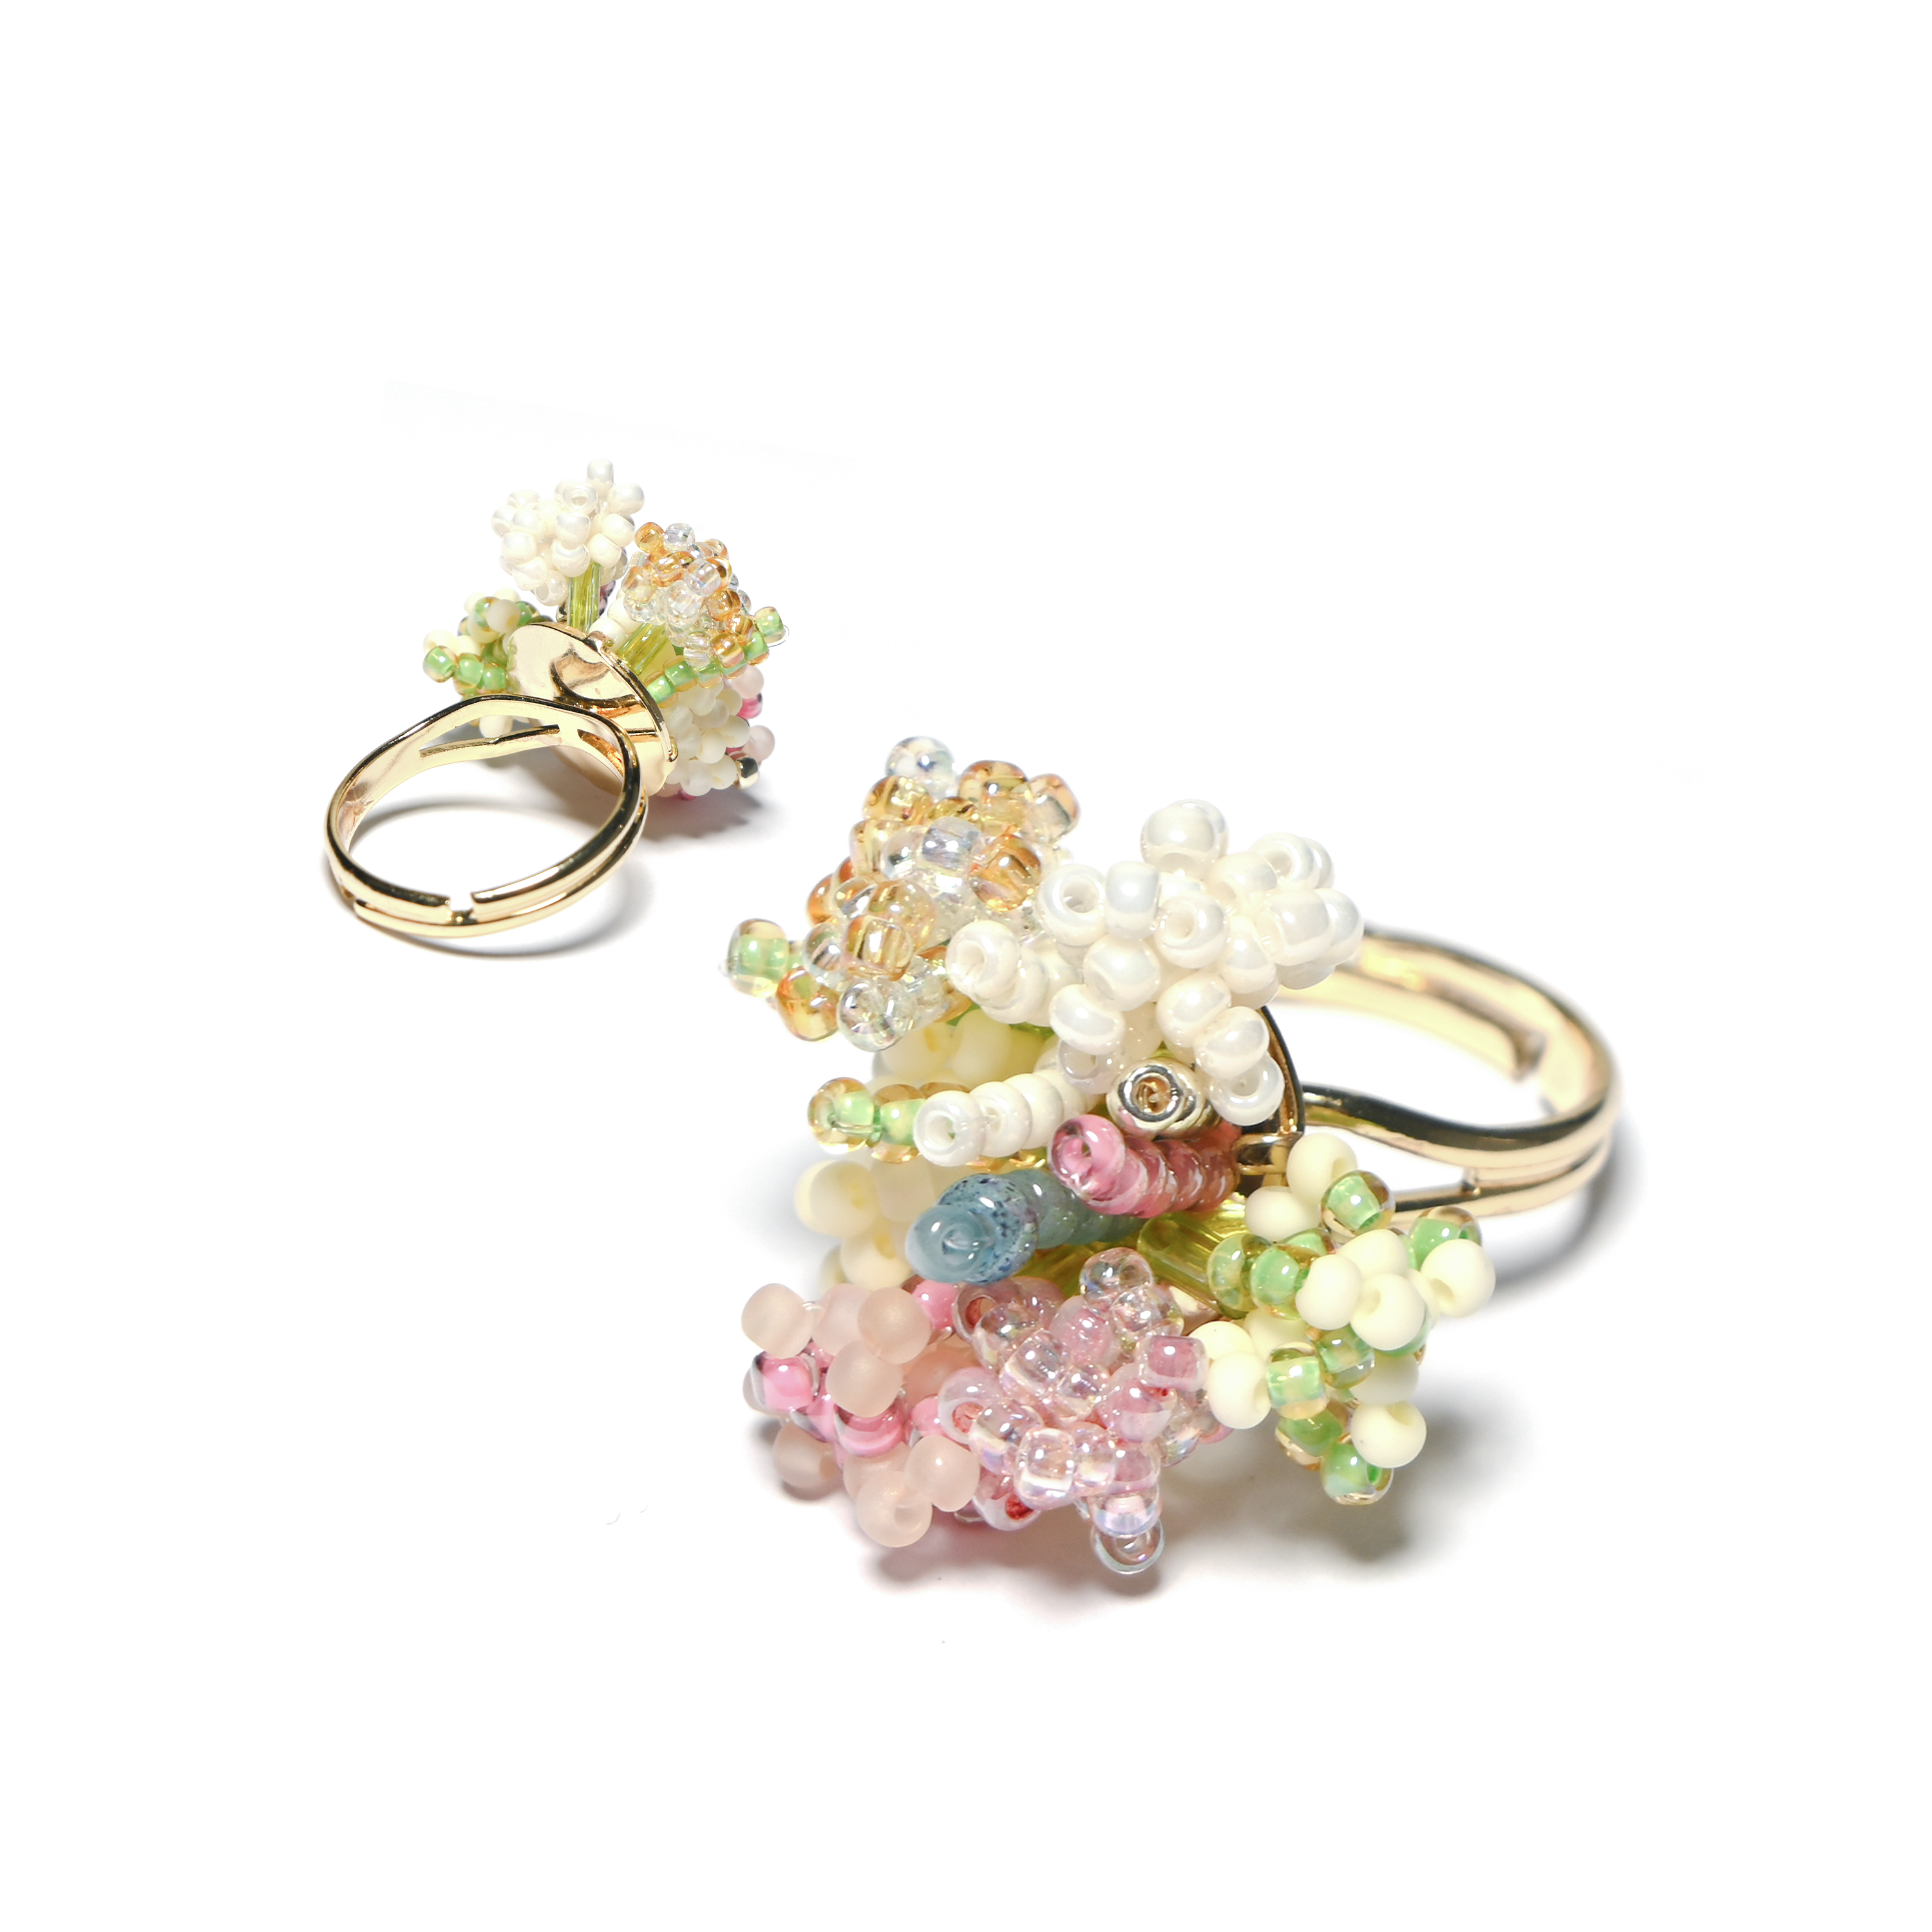 Colorful Flower Shape Handmade Beaded Ring, A Gift That Blooms.